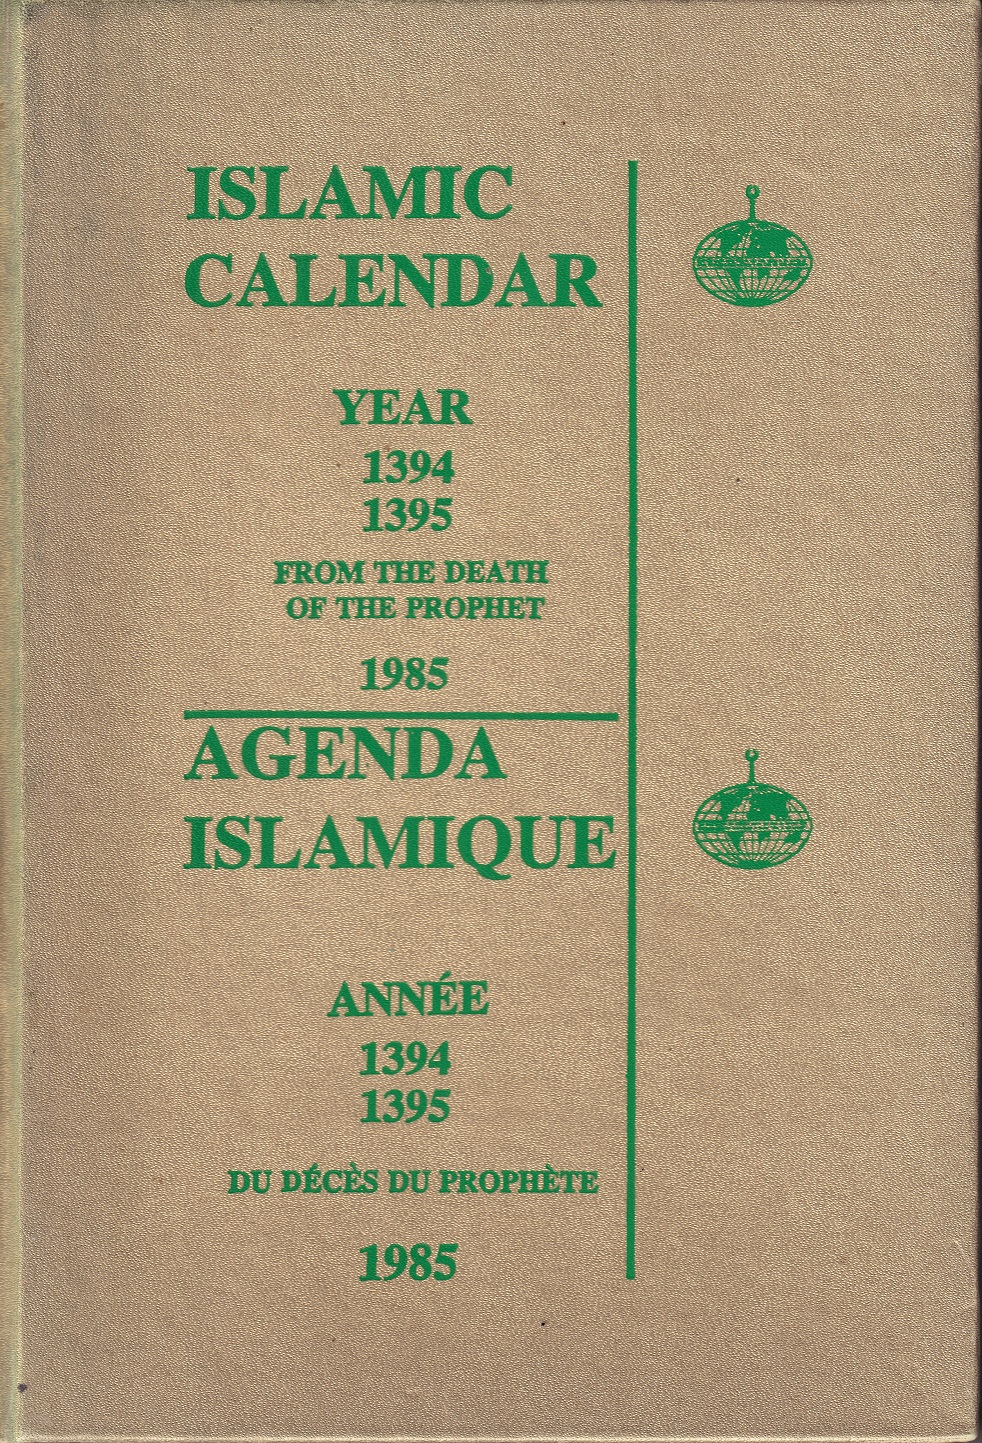 Islamic Calendar Year 1394-1395 - From the Death of the Prophet